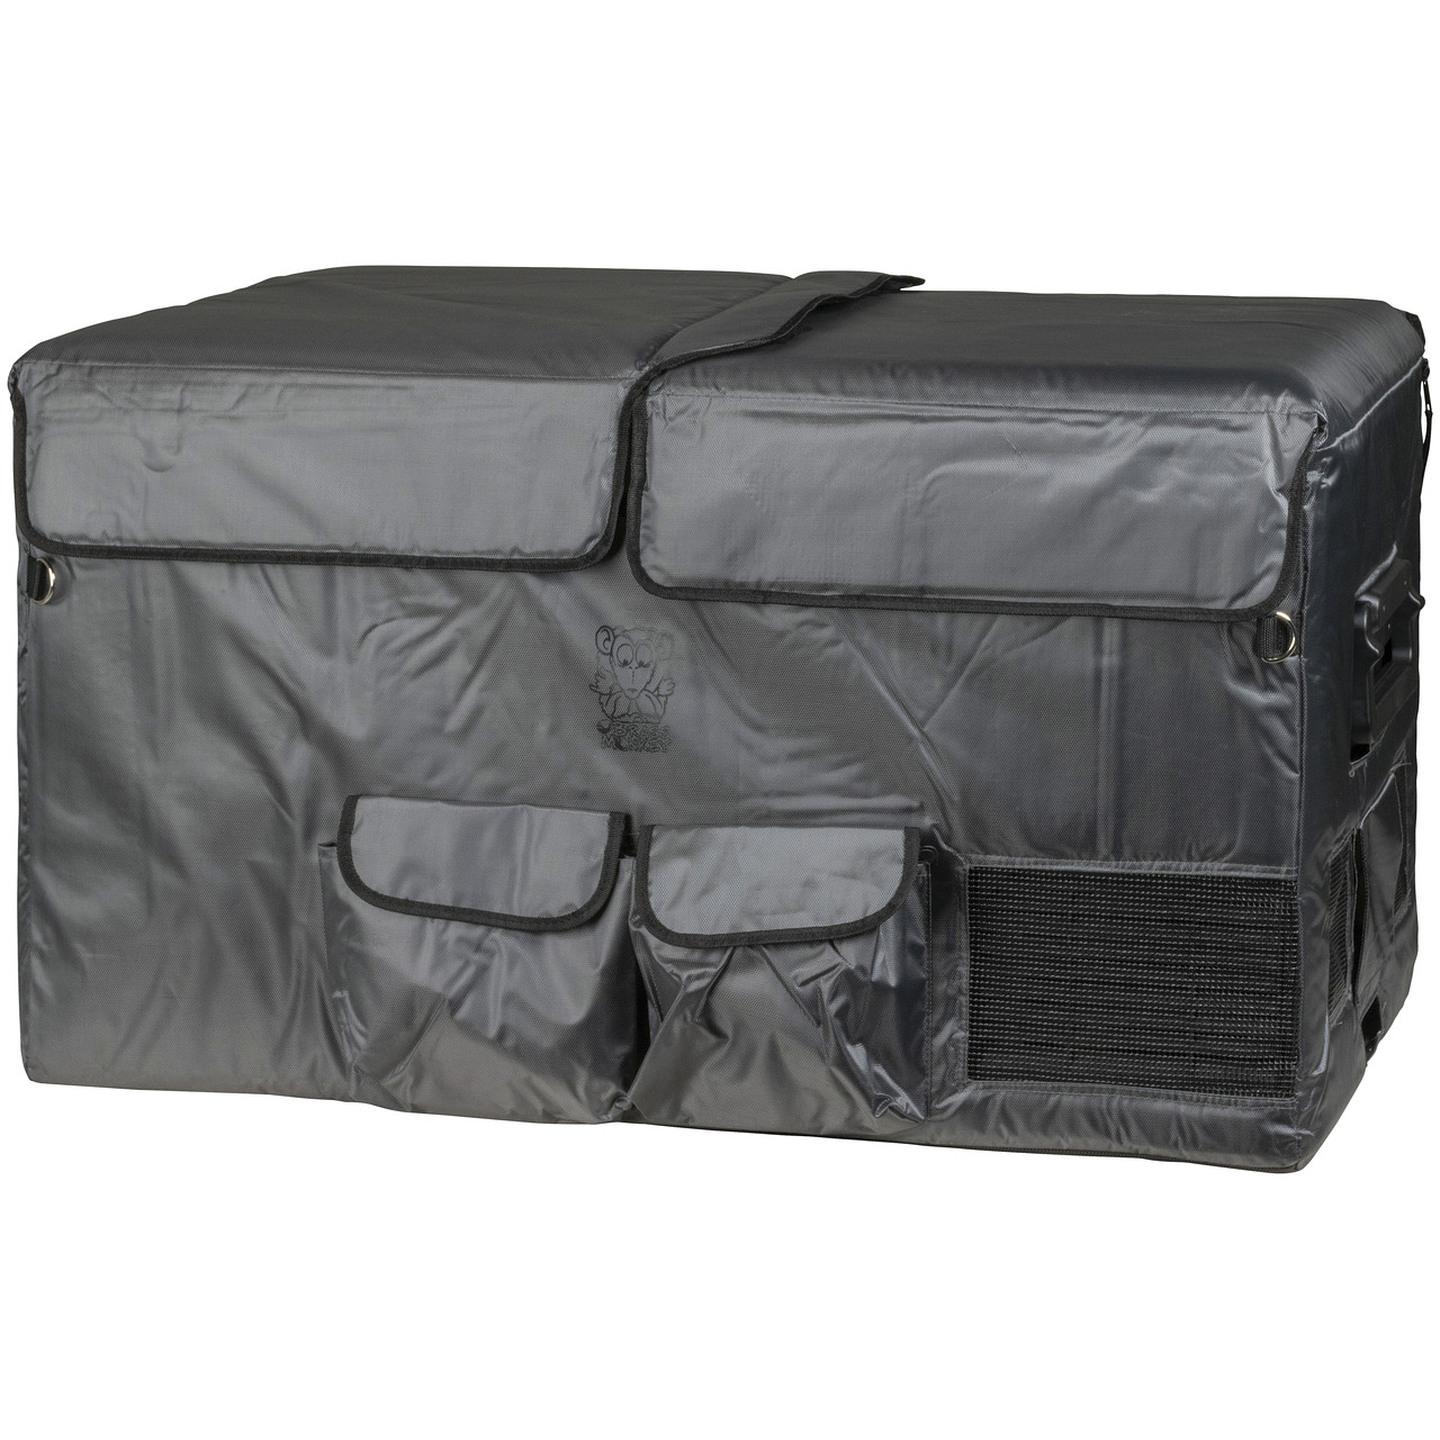 Grey Insulated Cover for 95L Brass Monkey Portable Fishing Fridge/Freezer